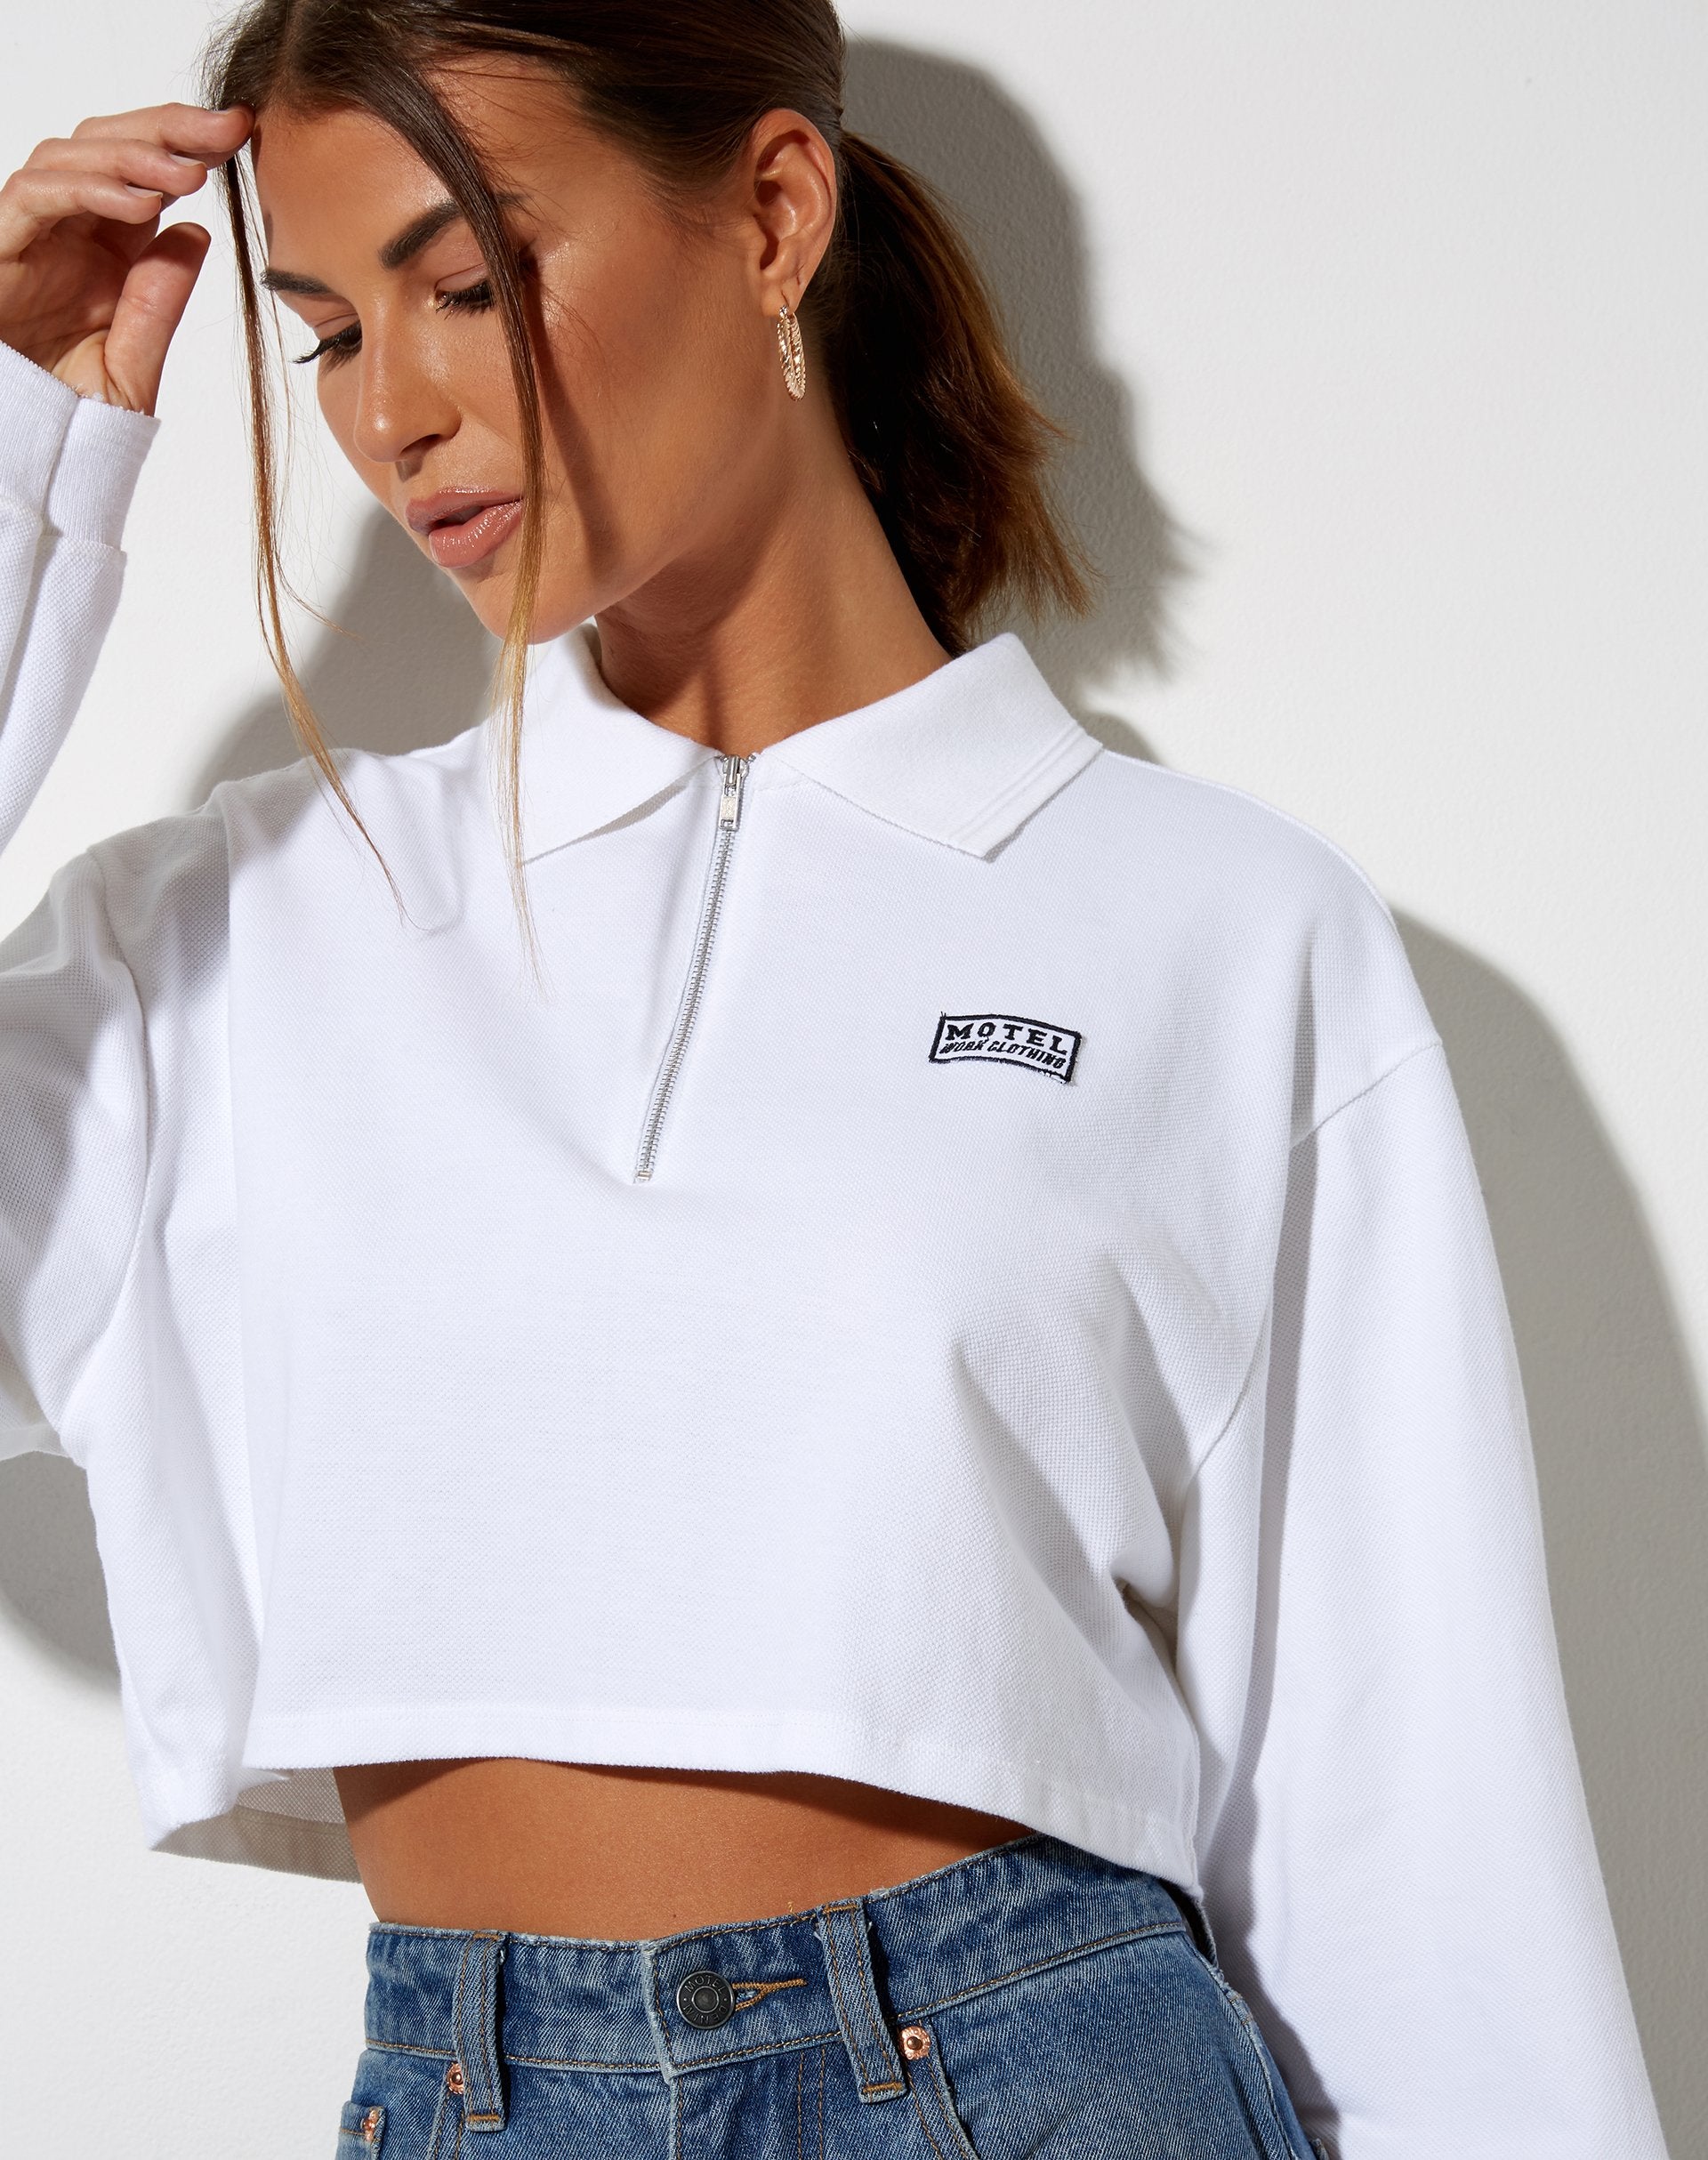 Image of Gandi Crop Top in White with Motel Work Clothing Label